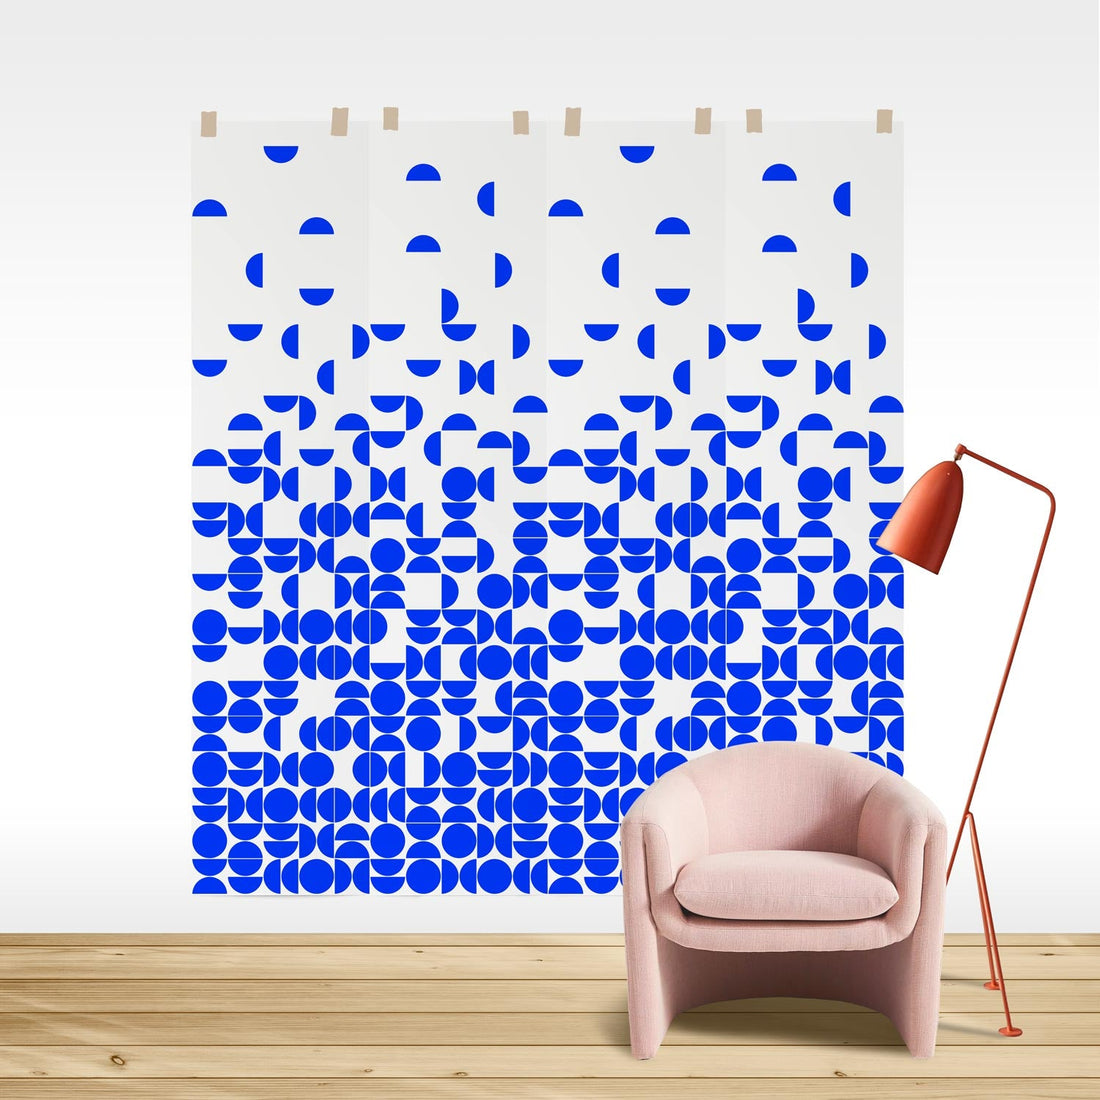 ombre inspired wall mural with geometric shapes in blue